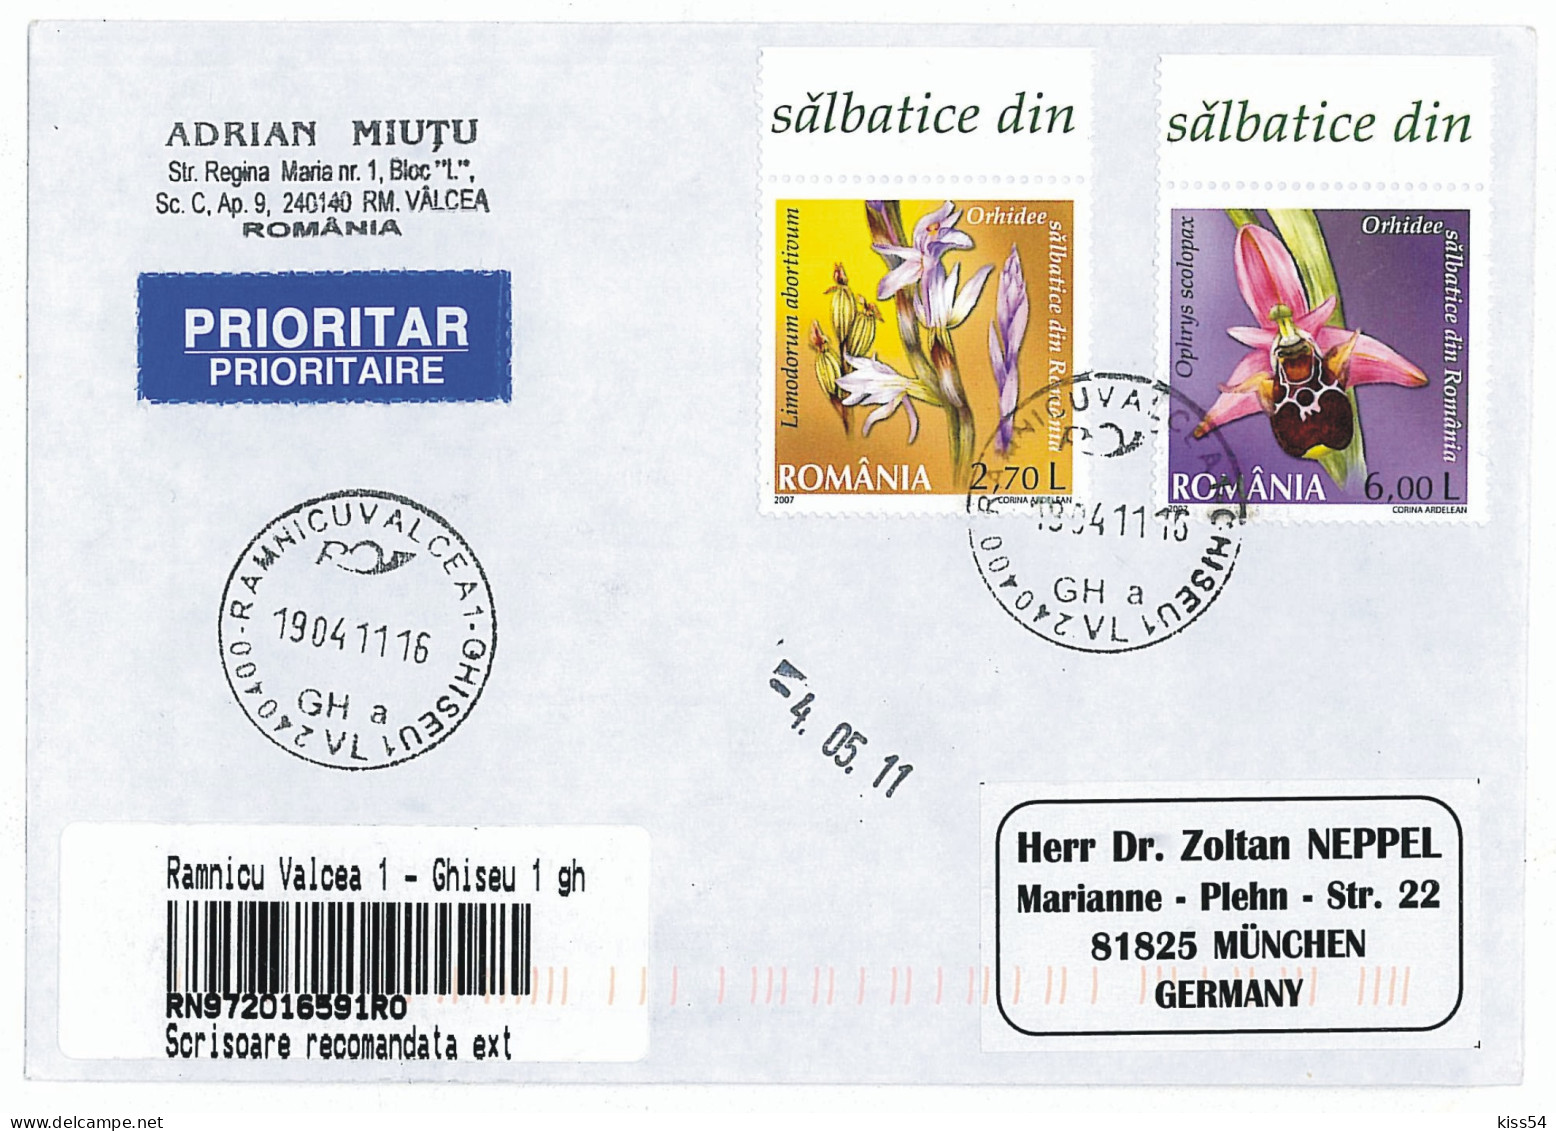 NCP 25 - 1-a ORCHIDS, Romania - INTERNATIONAL Registered - 2011 - Storia Postale